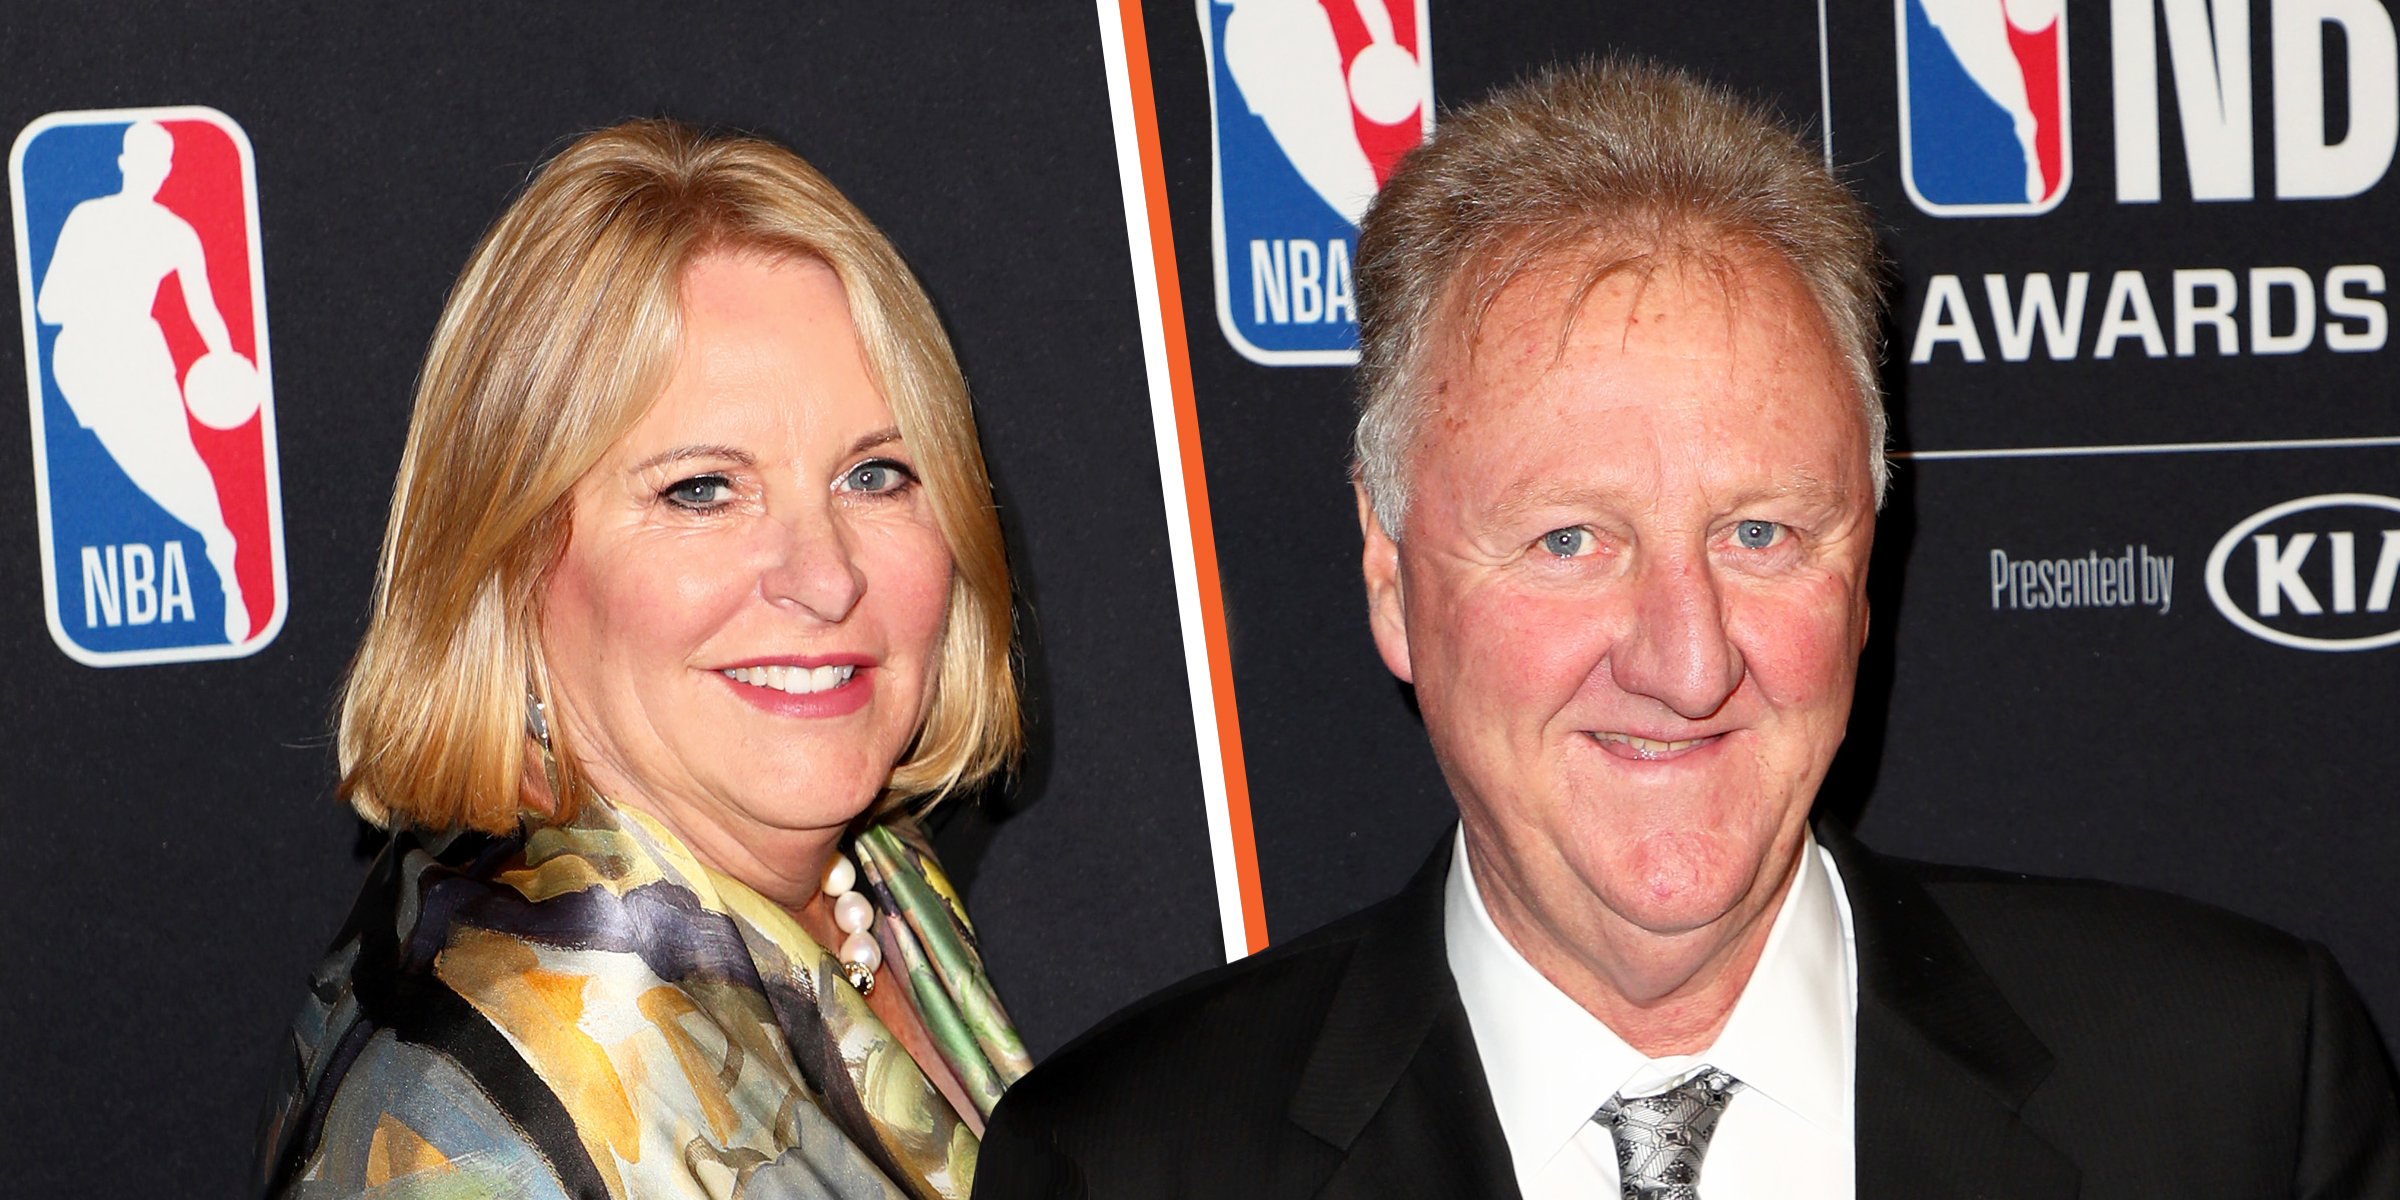 Dinah Mattingly: The Private Life and Journey of Larry Bird's Wife ...